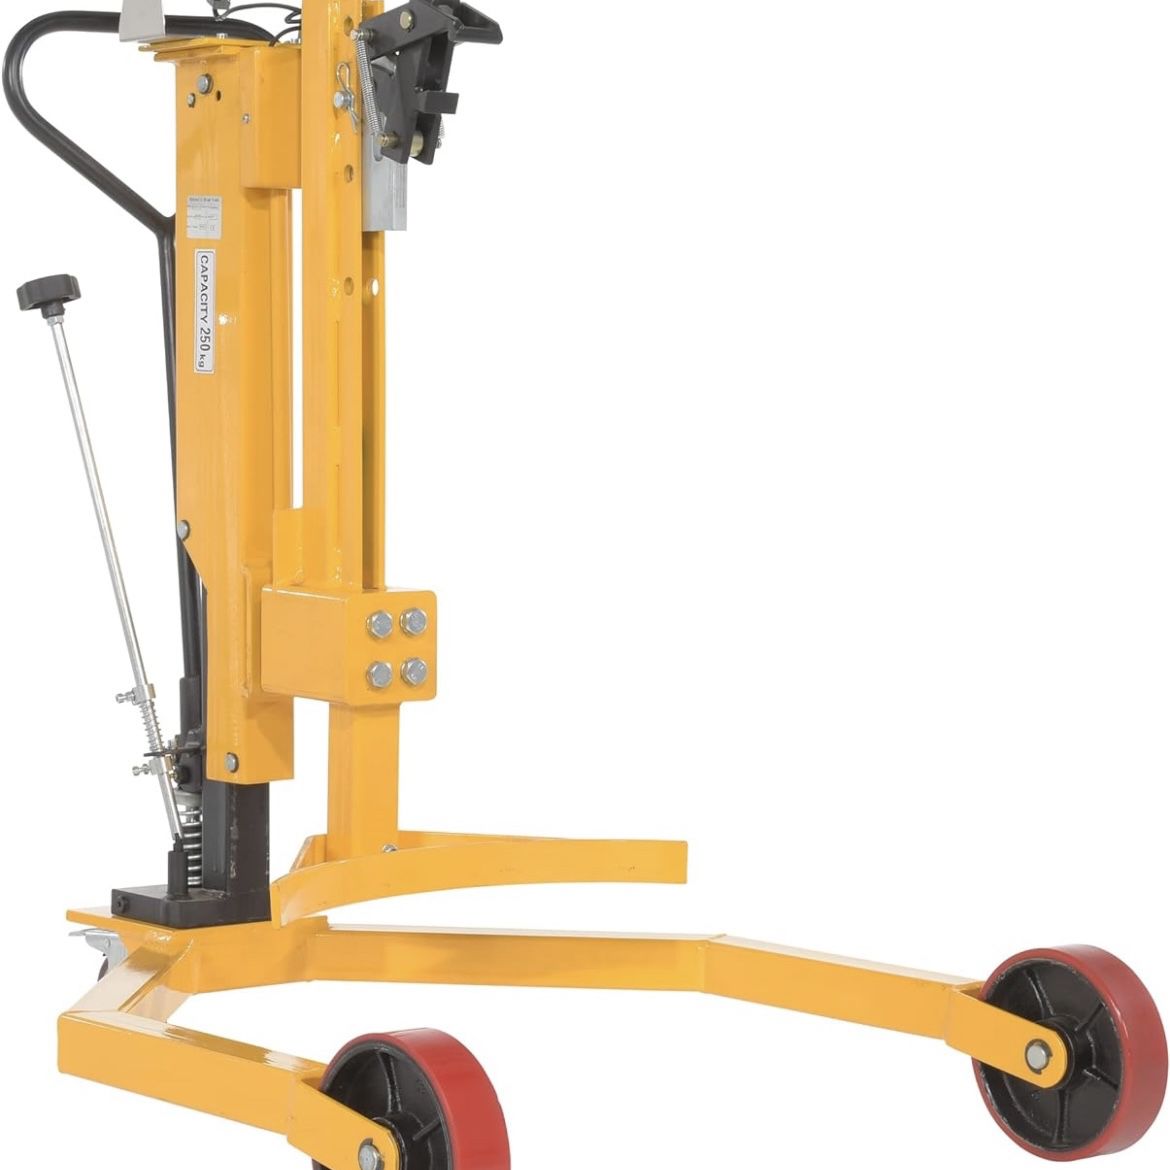 29-61 Vestil DRUM-55-SCL Ergonomic Drum Truck with Scale 500 lb. Capacity, 43" Length, 31" Width, 41" Height,Yellow